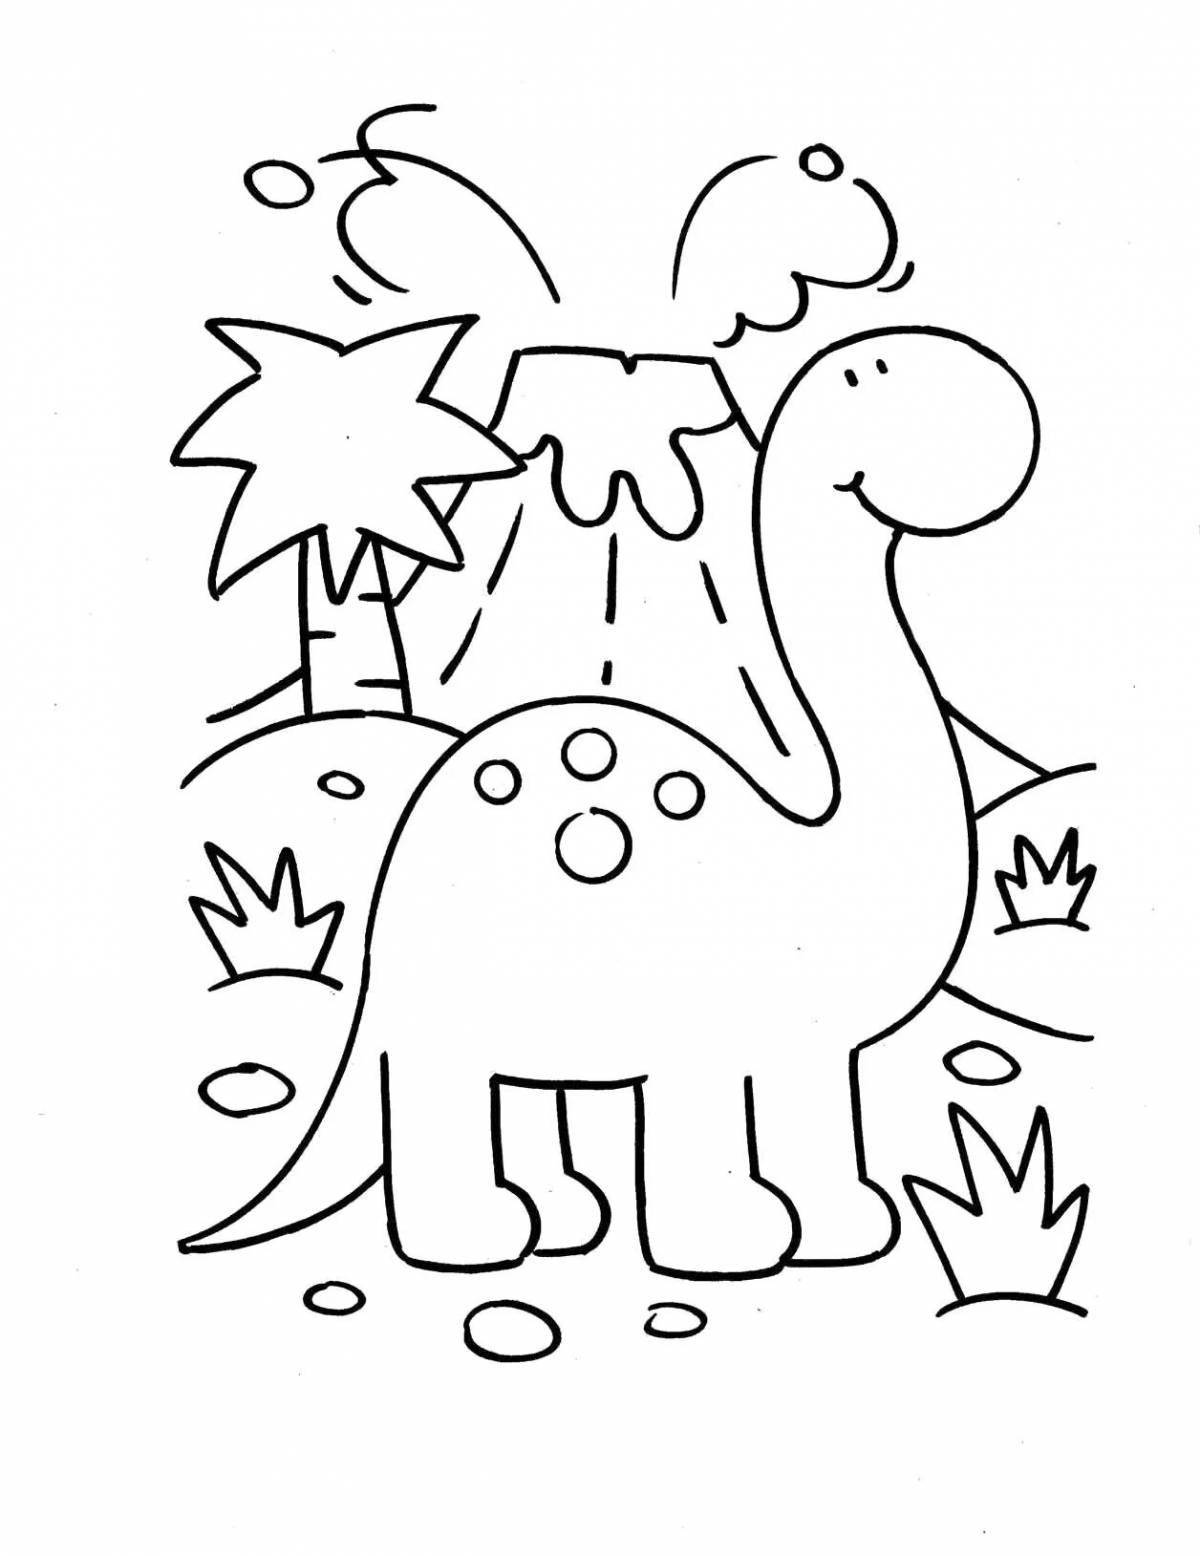 Funny dinosaurs coloring for children 3-4 years old